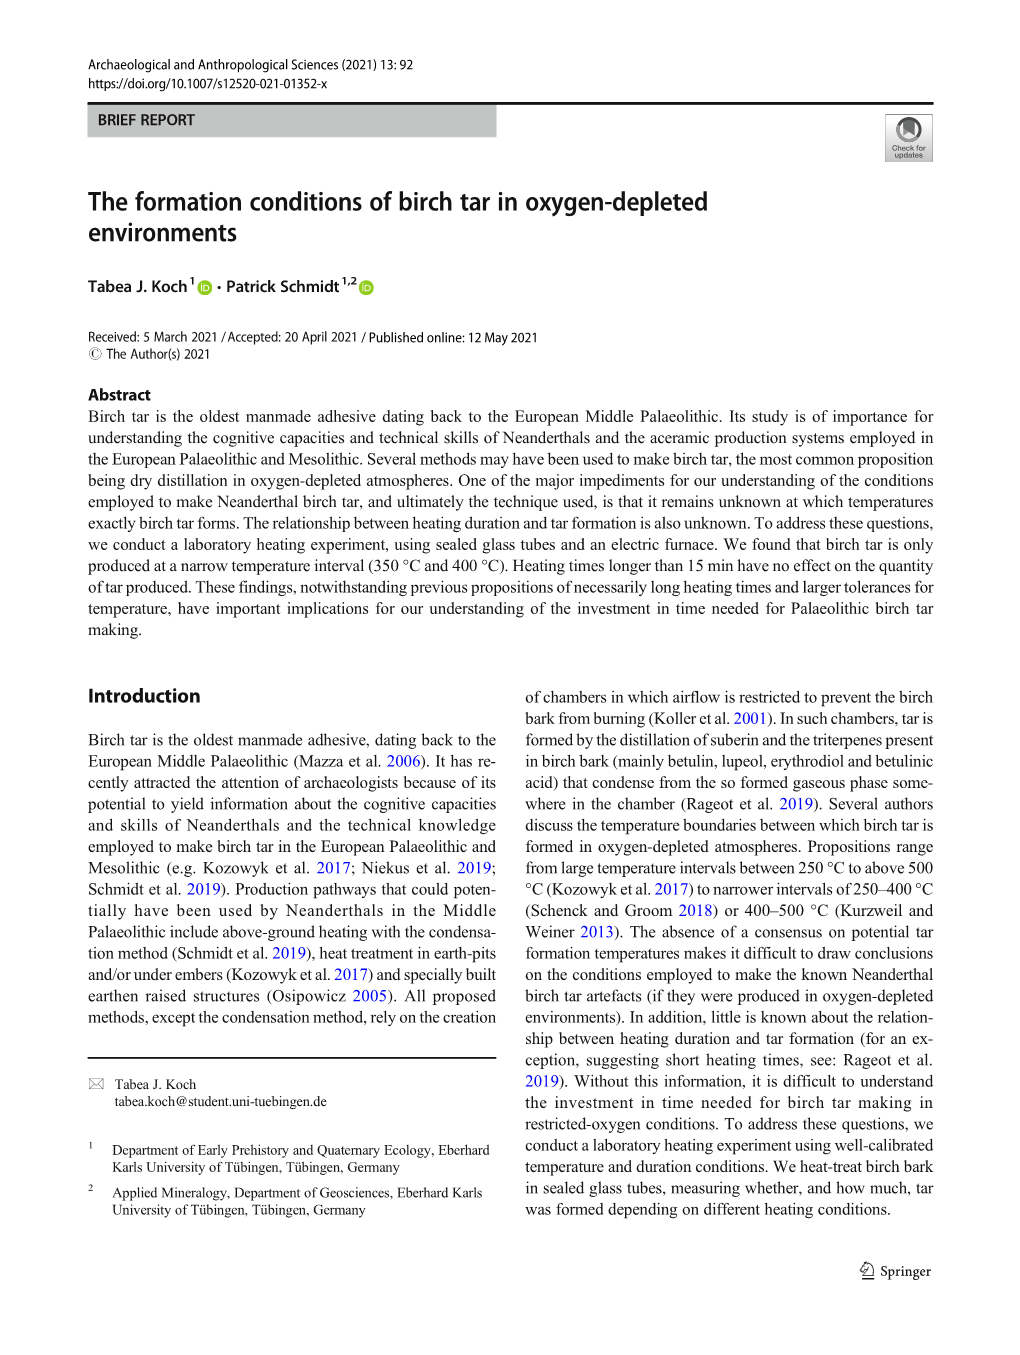 The Formation Conditions of Birch Tar in Oxygen-Depleted Environments